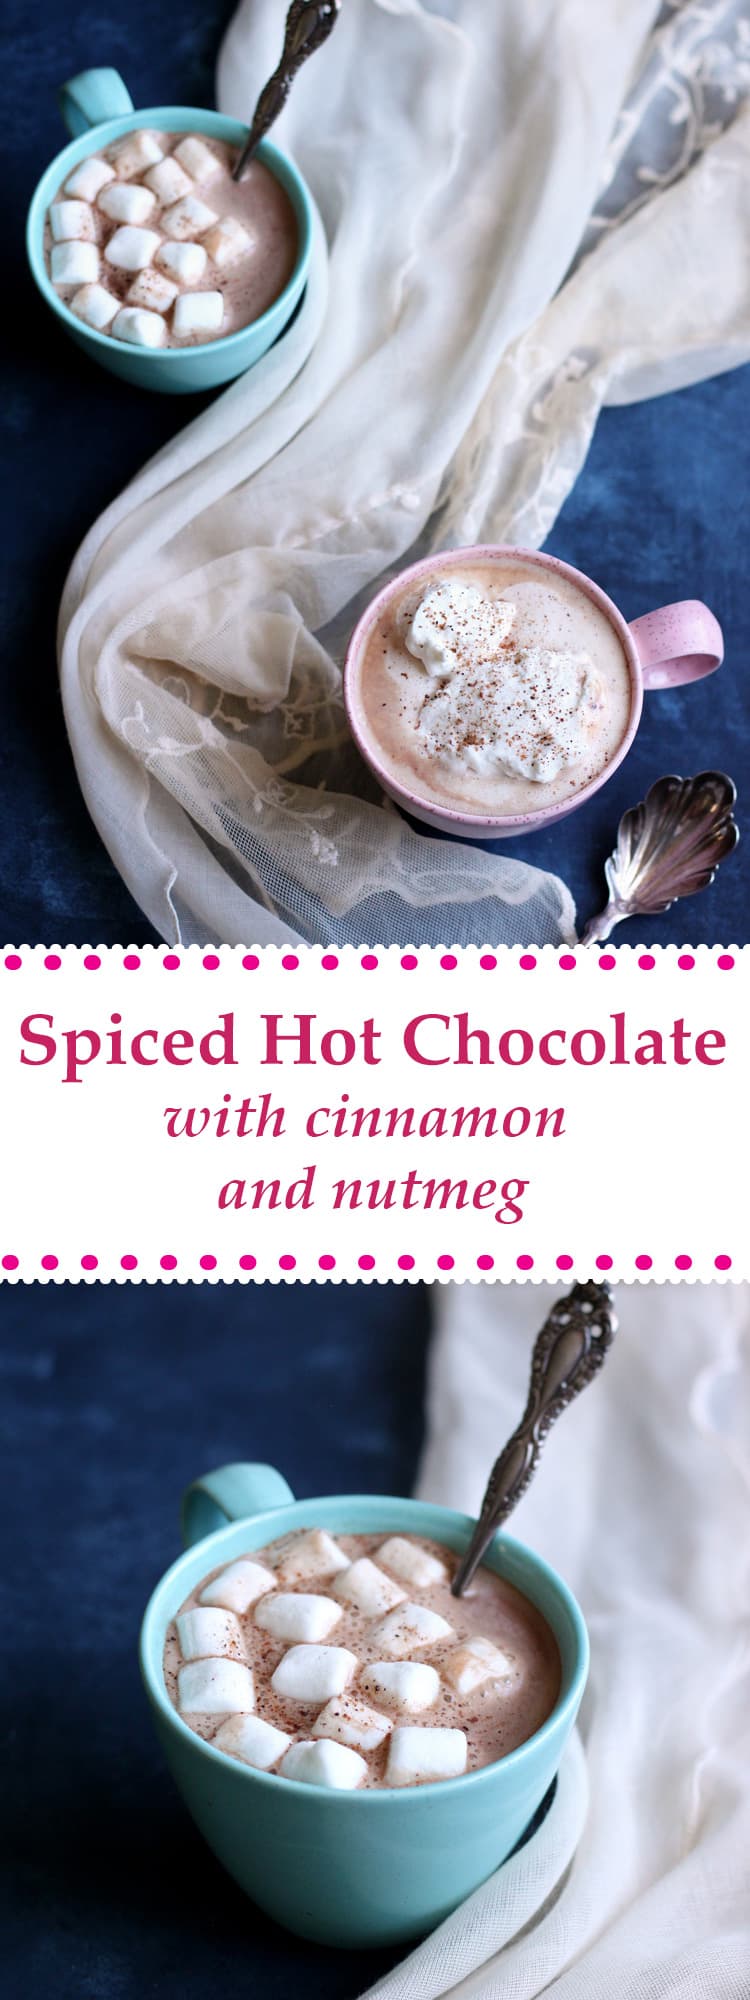 Tired of the same old store bought cocoa pack? Try this easy homemade Spiced Hot Chocolate with nutmeg and cinnamon, and stay sweet this holiday season! #hotchocolate #coldweatherdrinks #hotcocoa